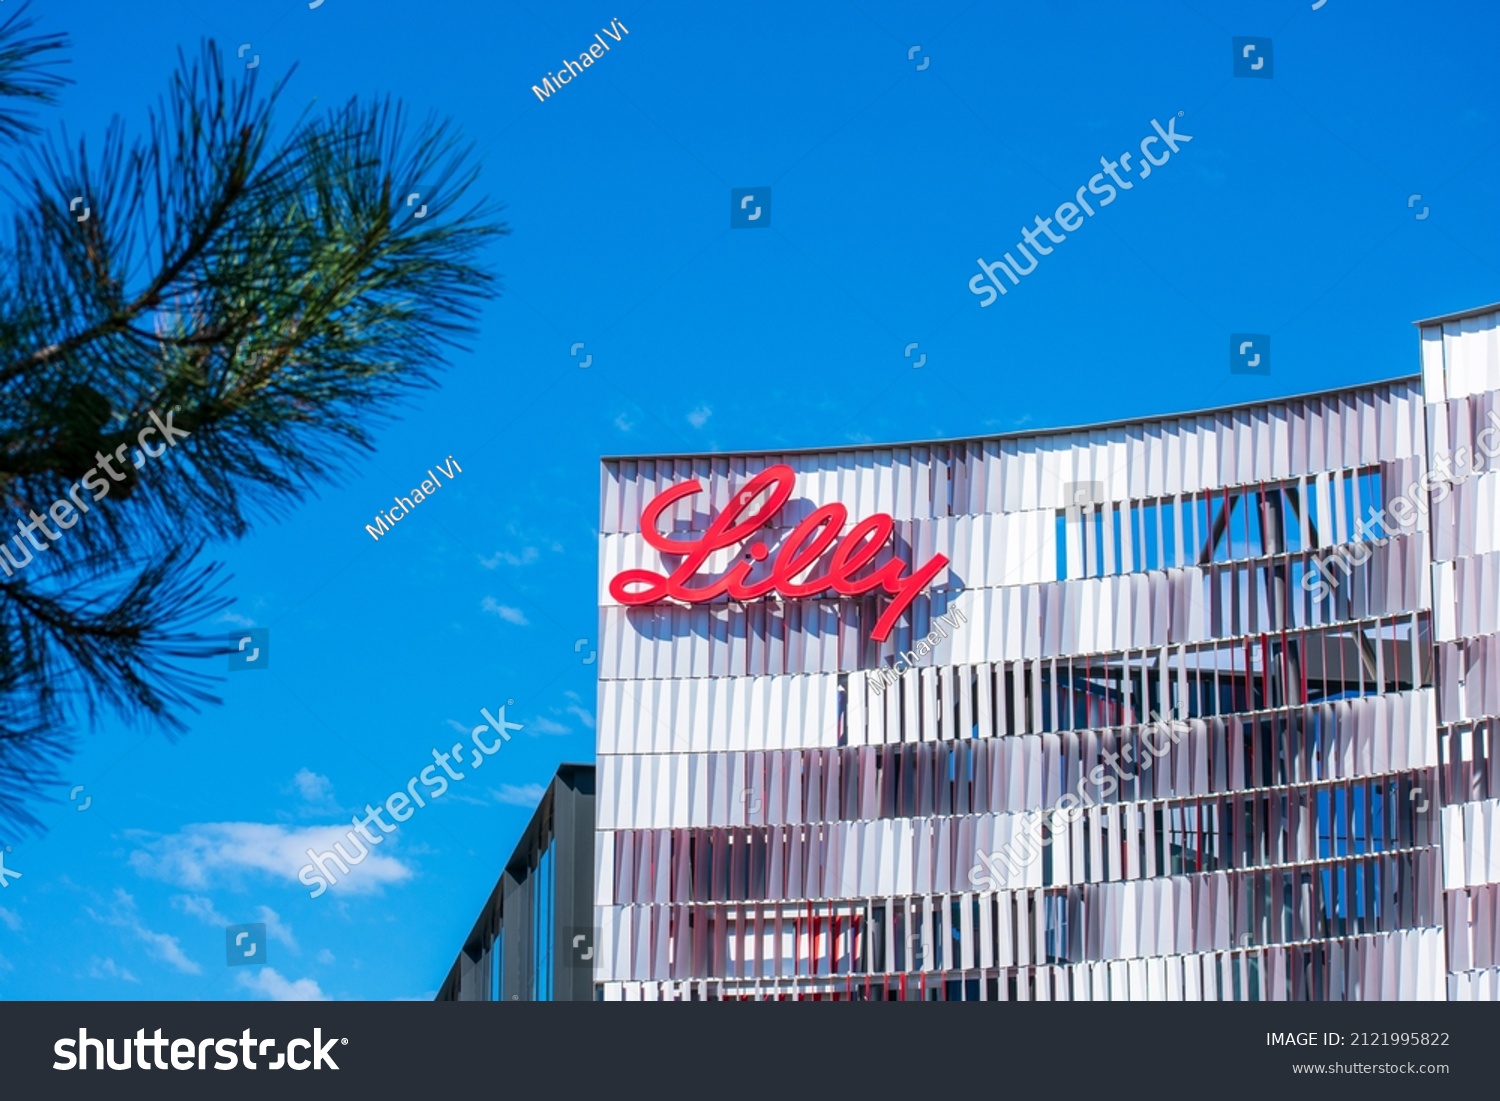 6 Lilly biotechnology center Images, Stock Photos & Vectors Shutterstock